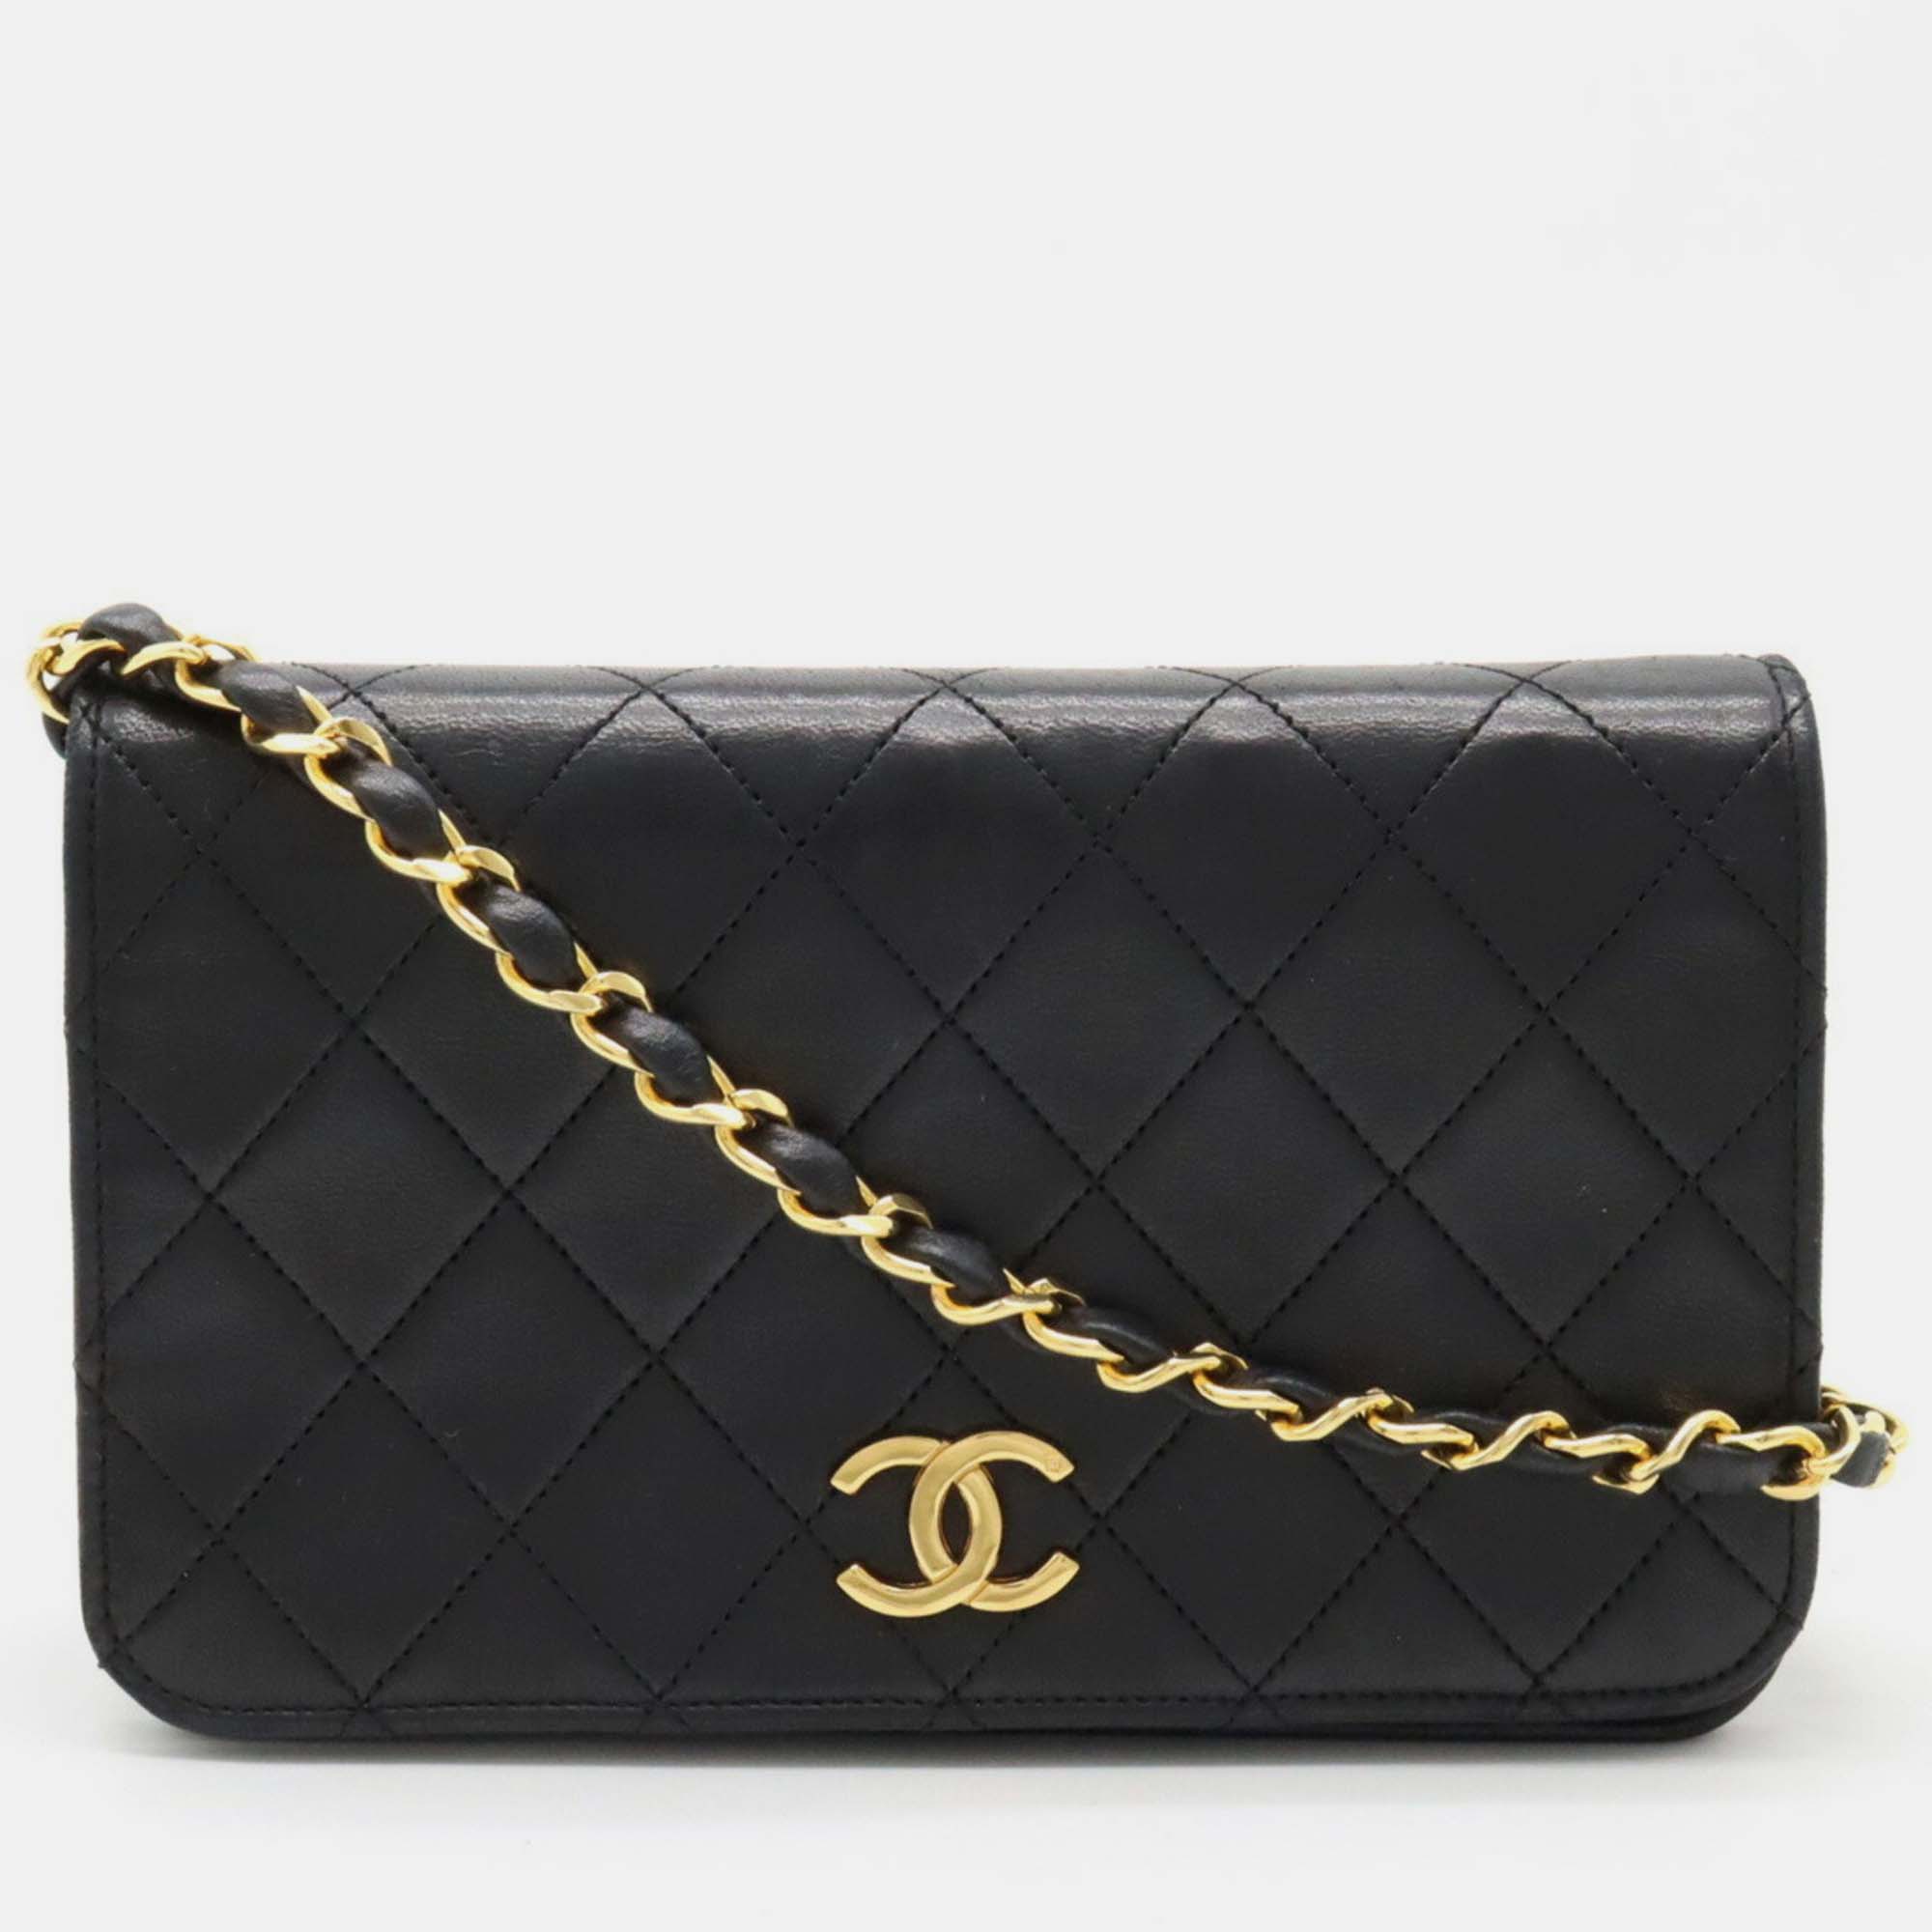 Chanel black quilted leather full flap bag